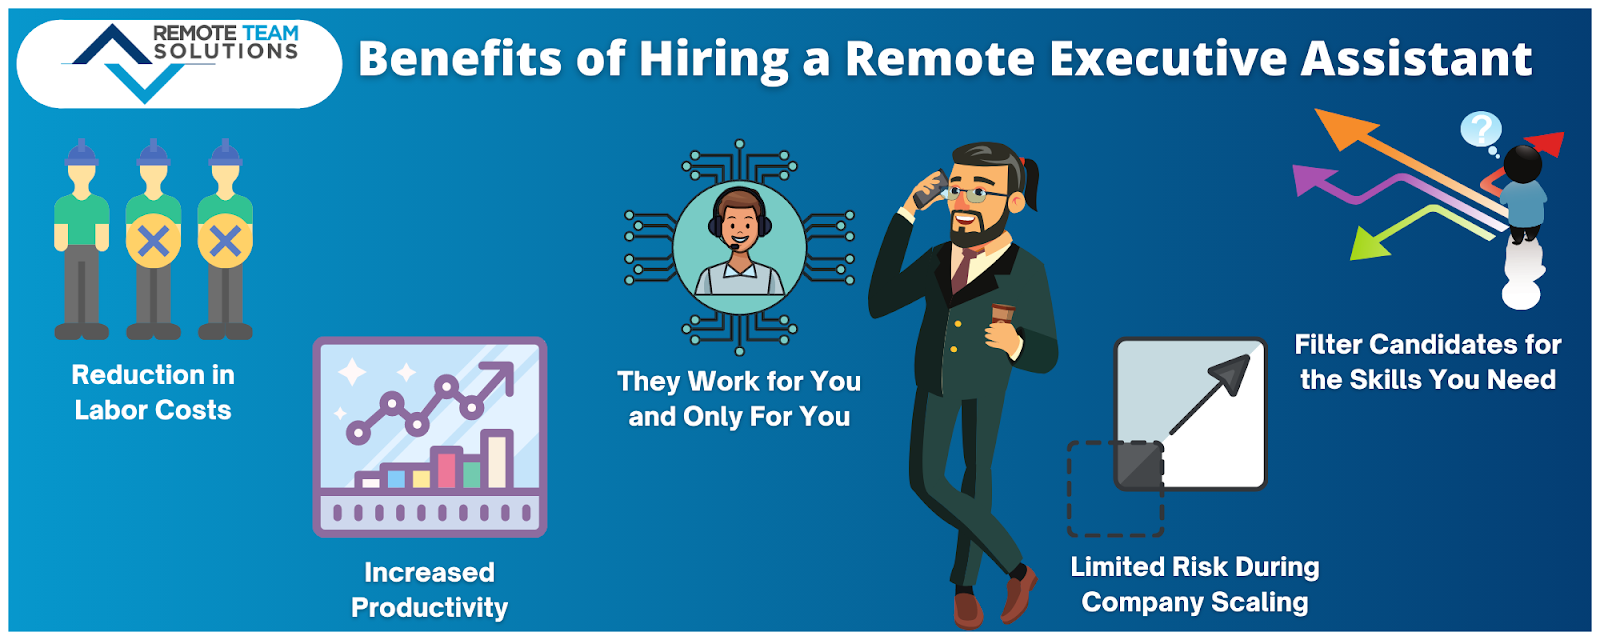 Infographic expalining benefits of hiring a remote executive assistant.